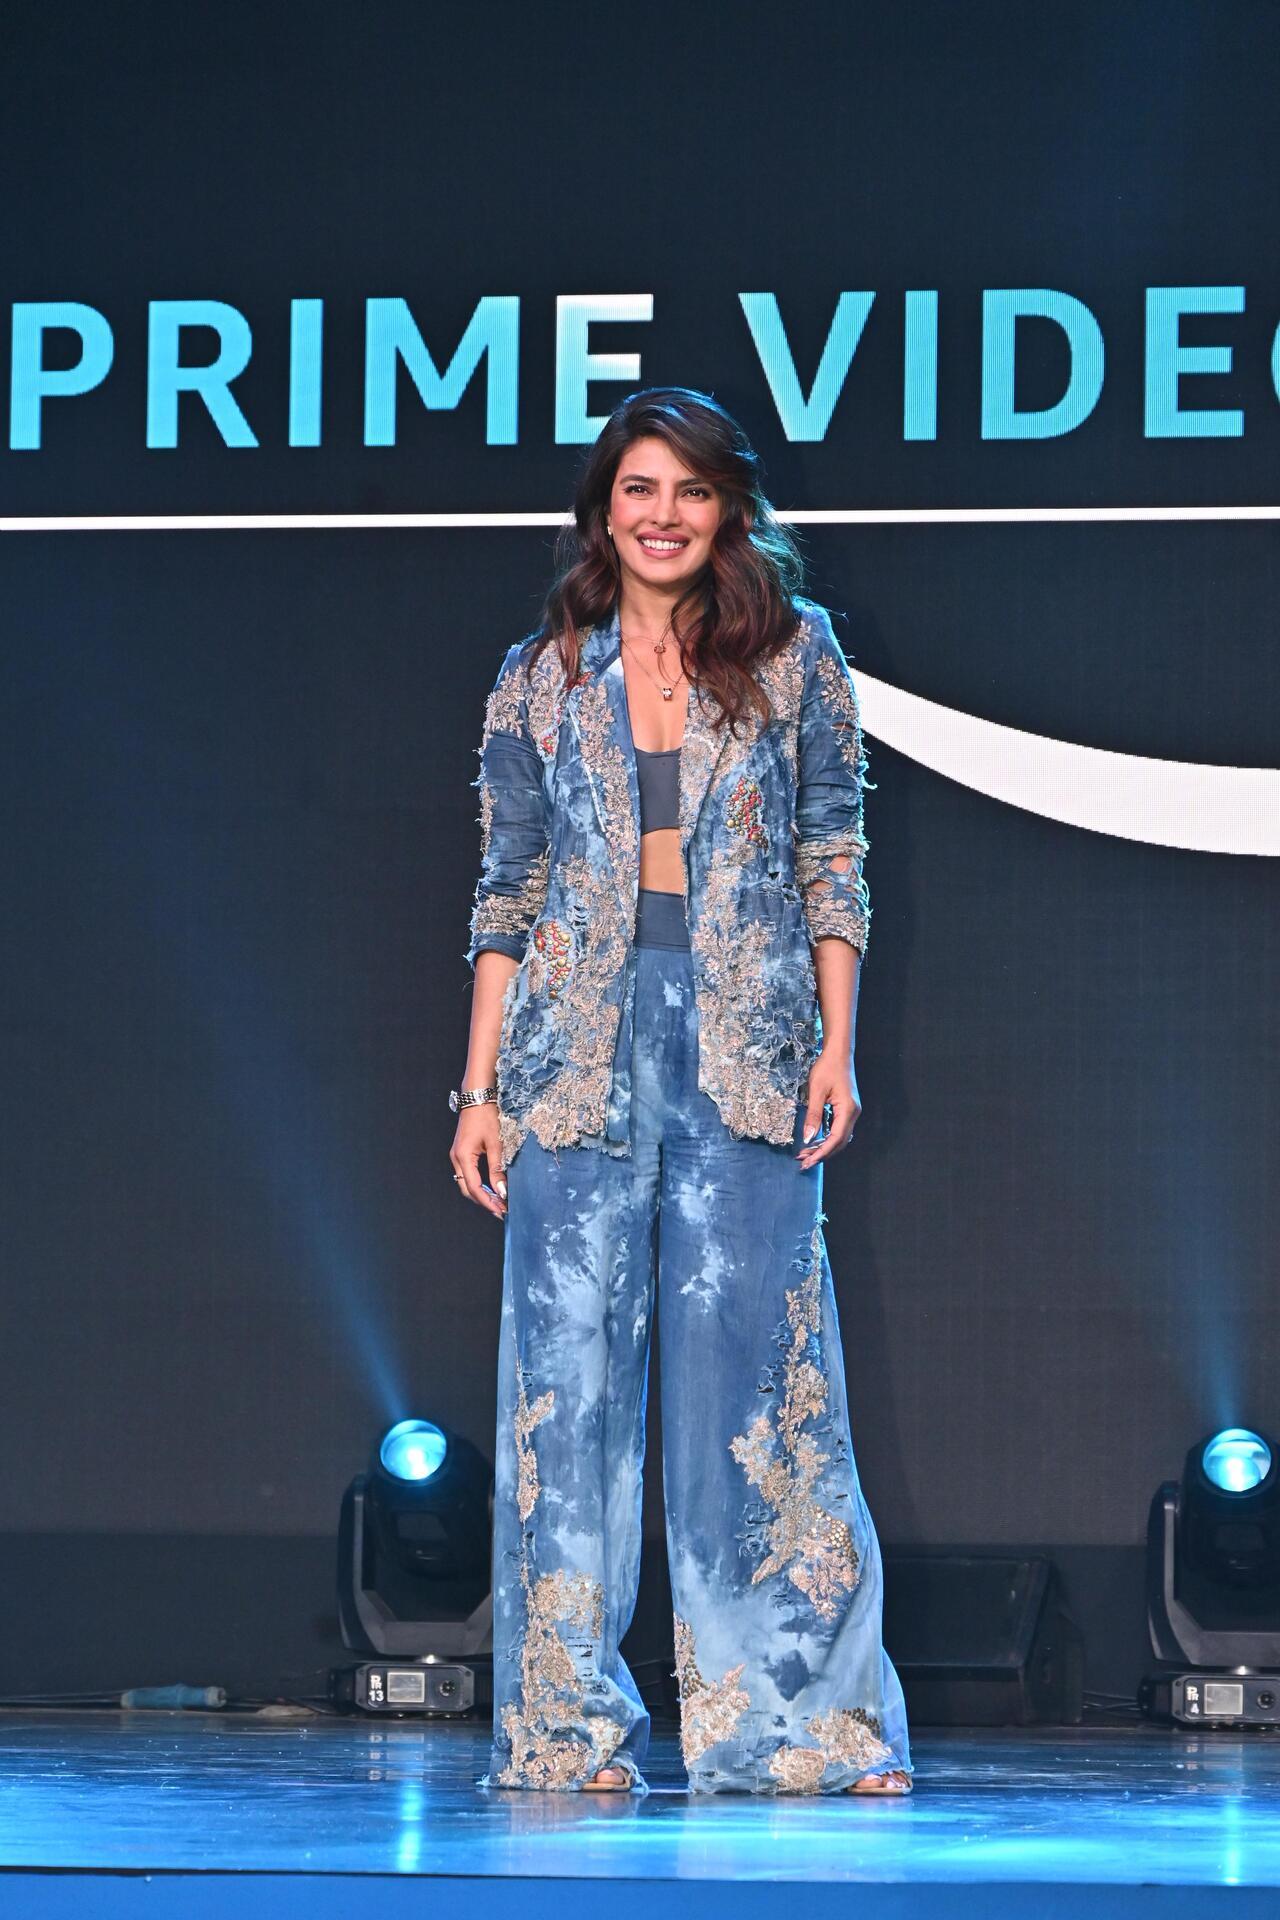 Priyanka Chopra was all smiles as she announced her next project as a producer